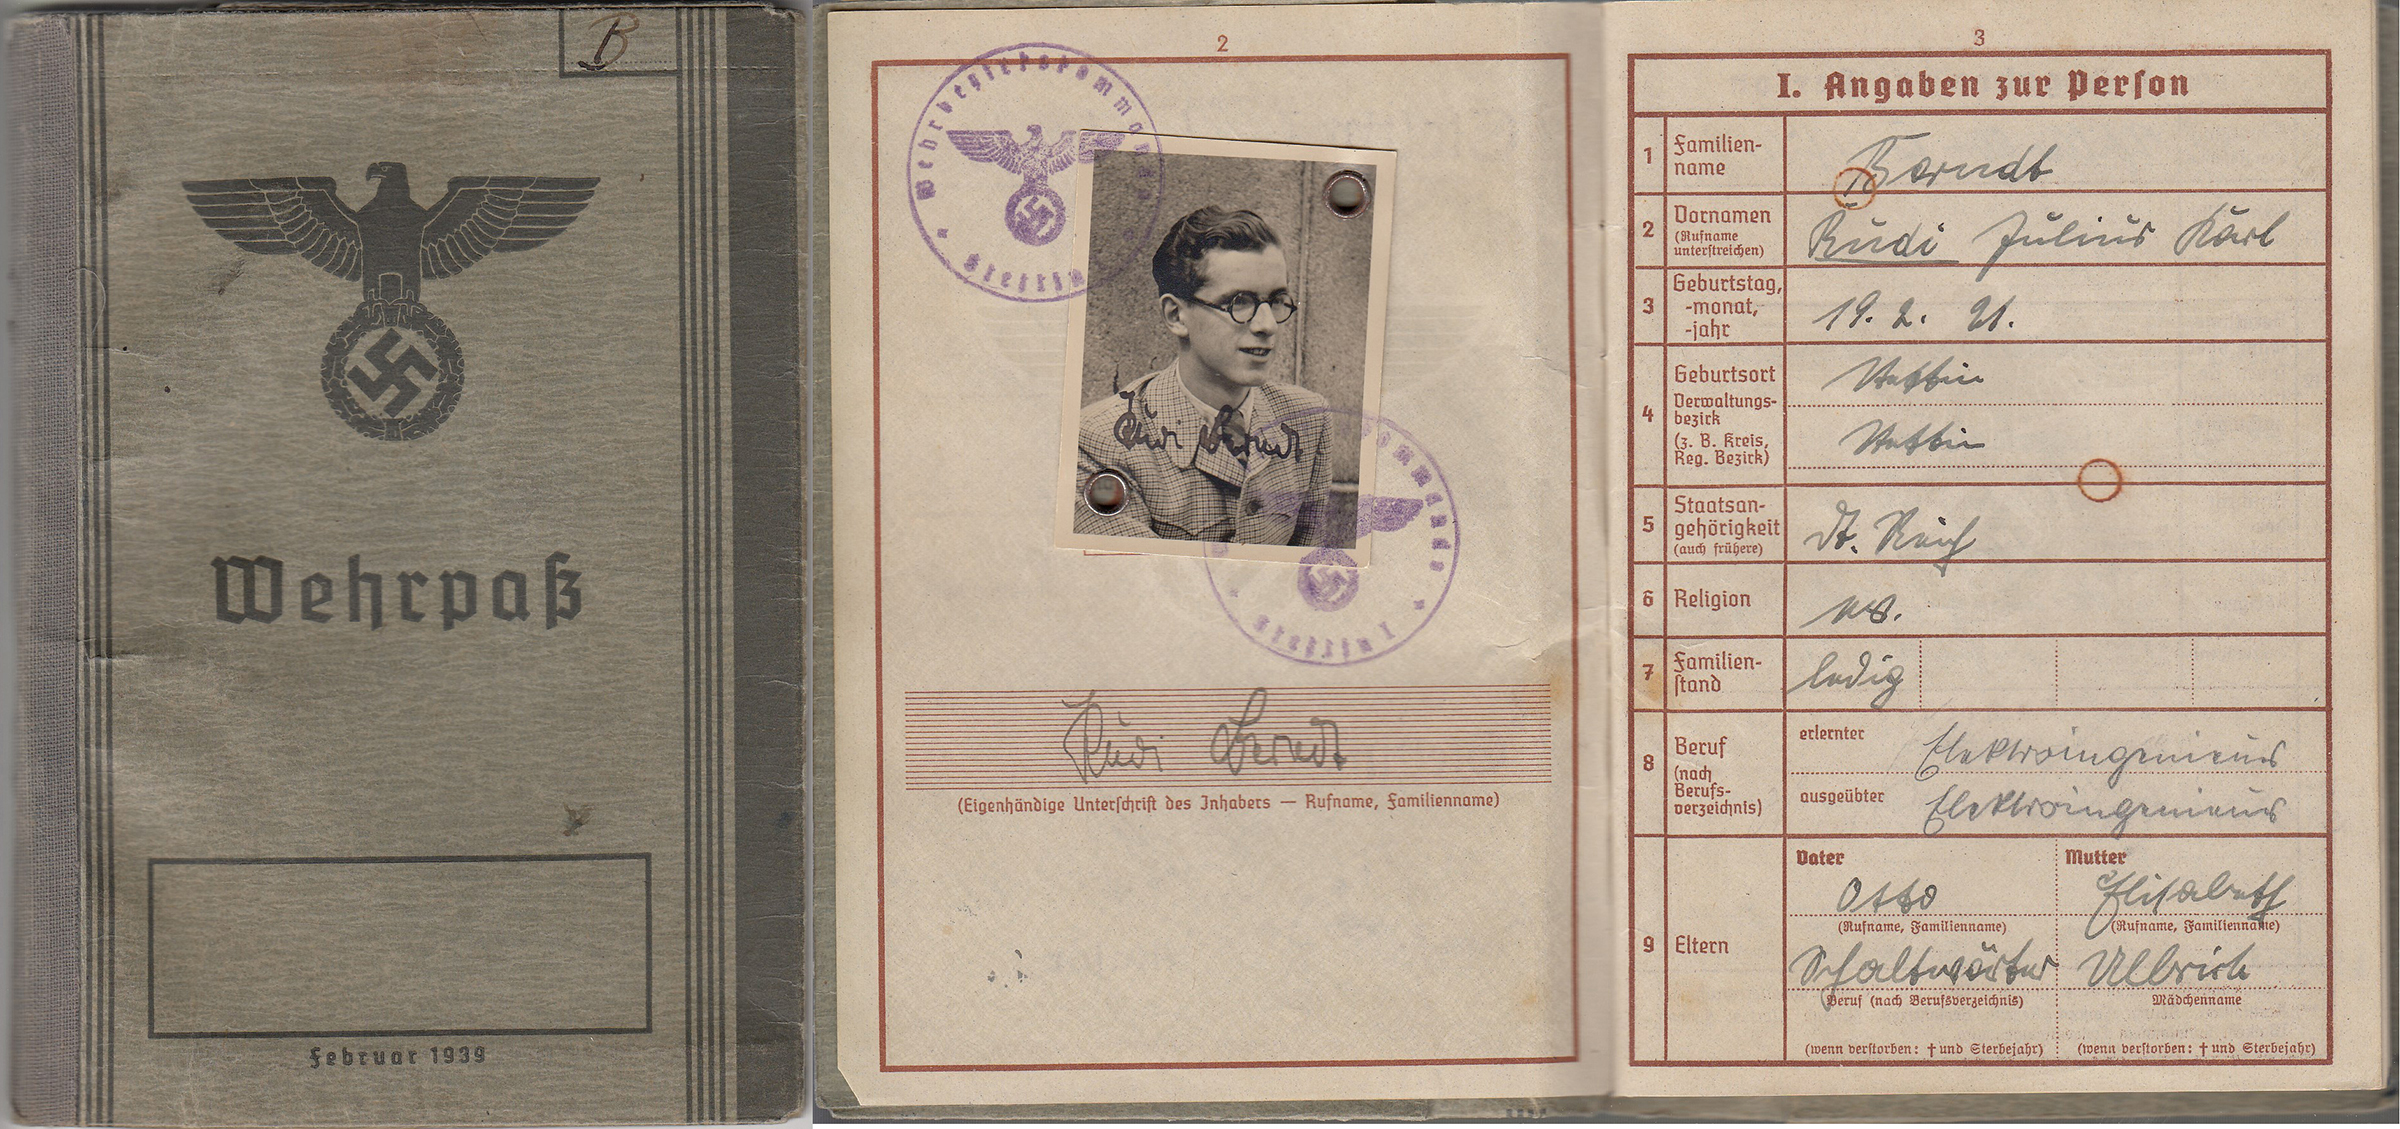 Berndt's Wehrpass (Military Passport), open to the identification page (Box 1, File 8)